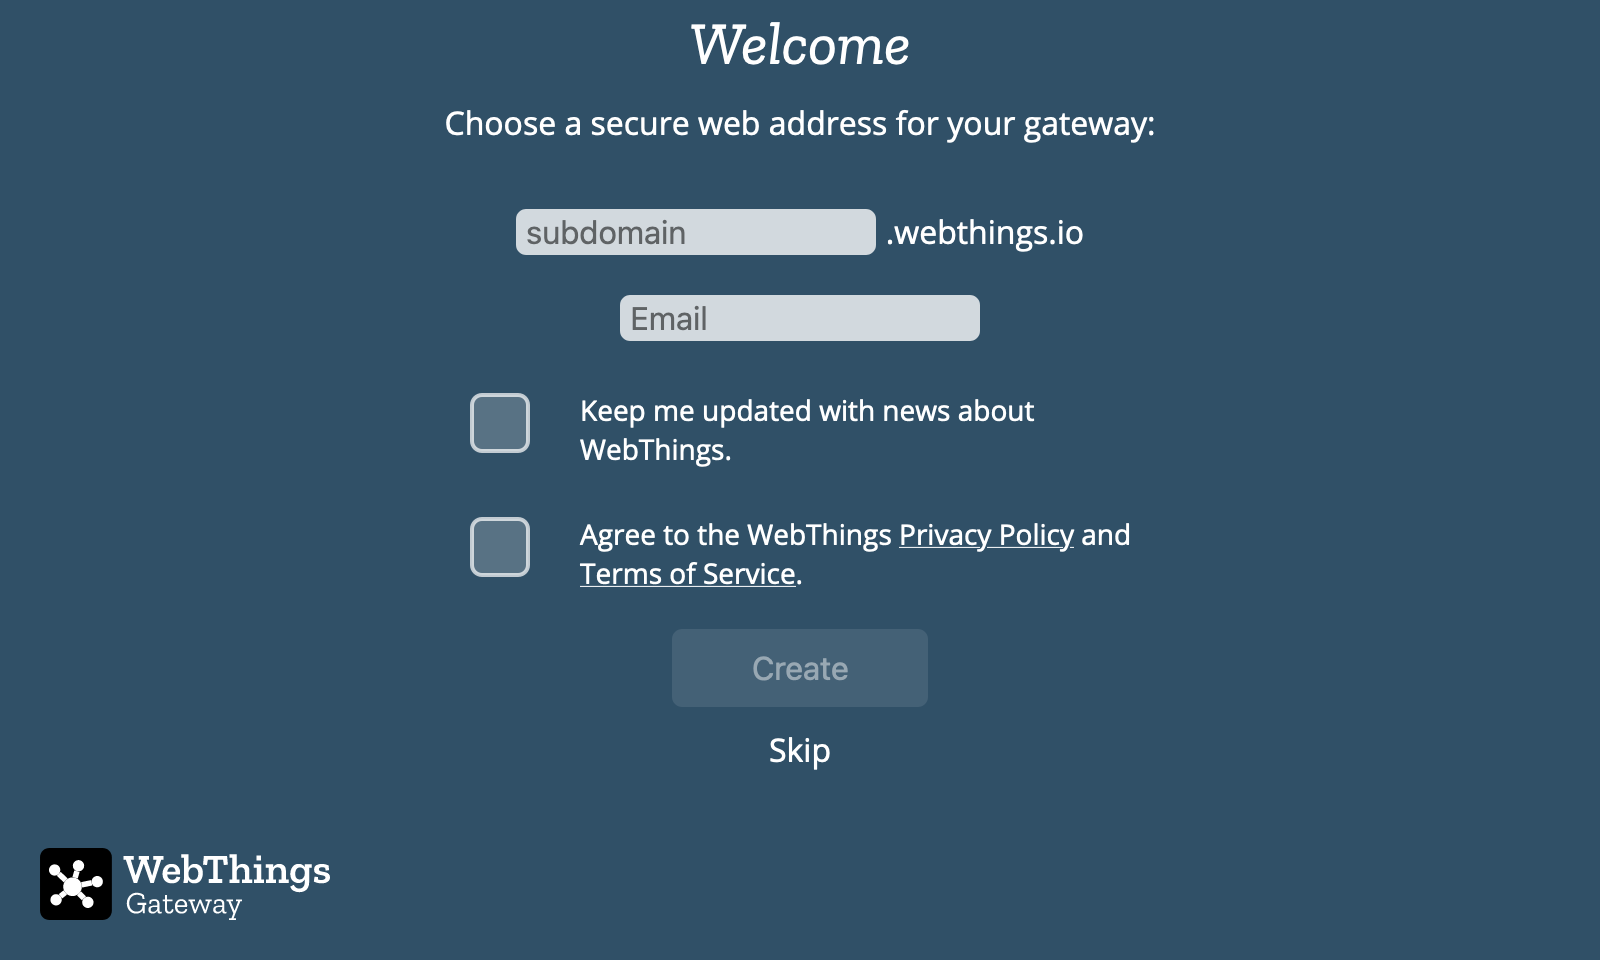 A screenshot showing a form to choose a subdomain of webthings.io and enter an email address